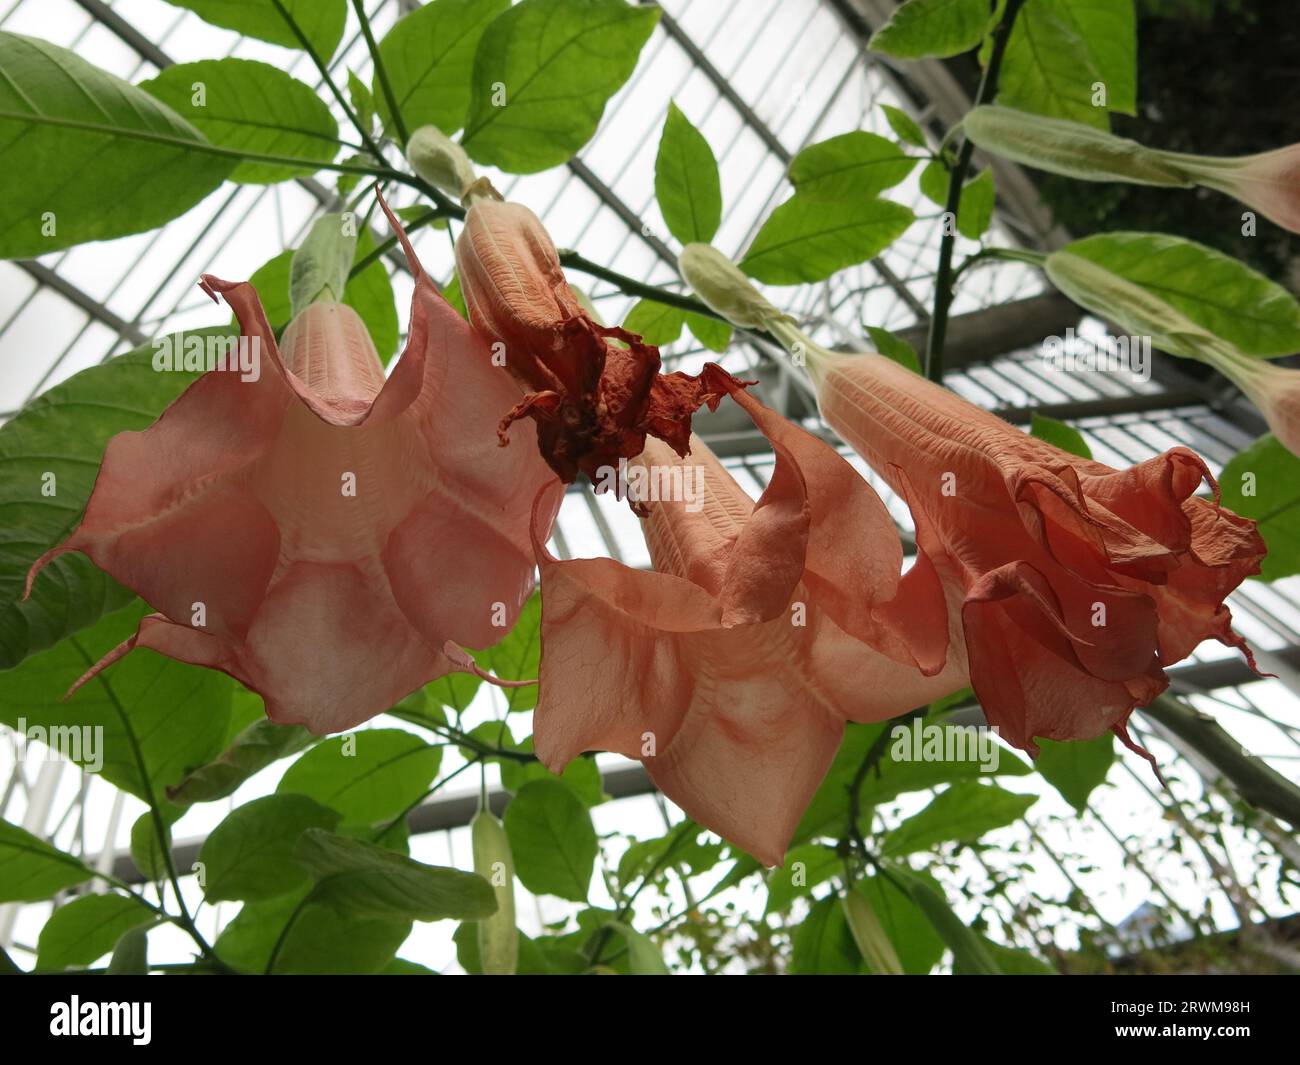 Giant, pendulous, salmon-coloured flowers of Angel's Trumpet make a striking display of exotic blooms in a tropical greenhouse or warm conservatory. Stock Photo